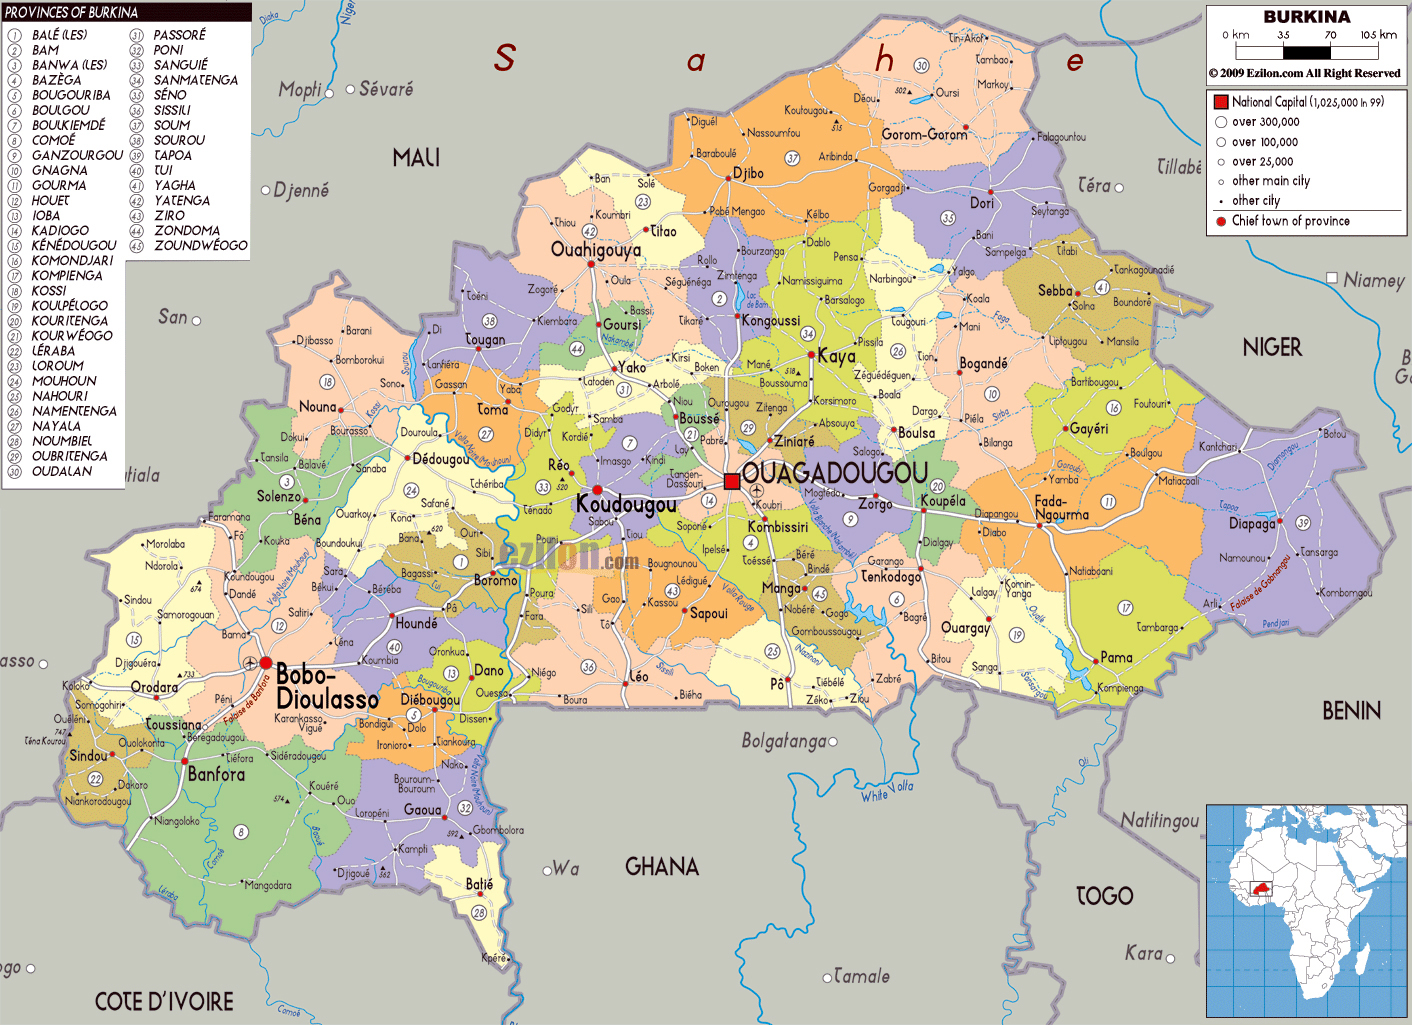 Burkina Faso Detailed Administrative Map With All Cities Detailed Administrative Map Of Burkina Faso With All Cities Vidiani Com Maps Of All Countries In One Place